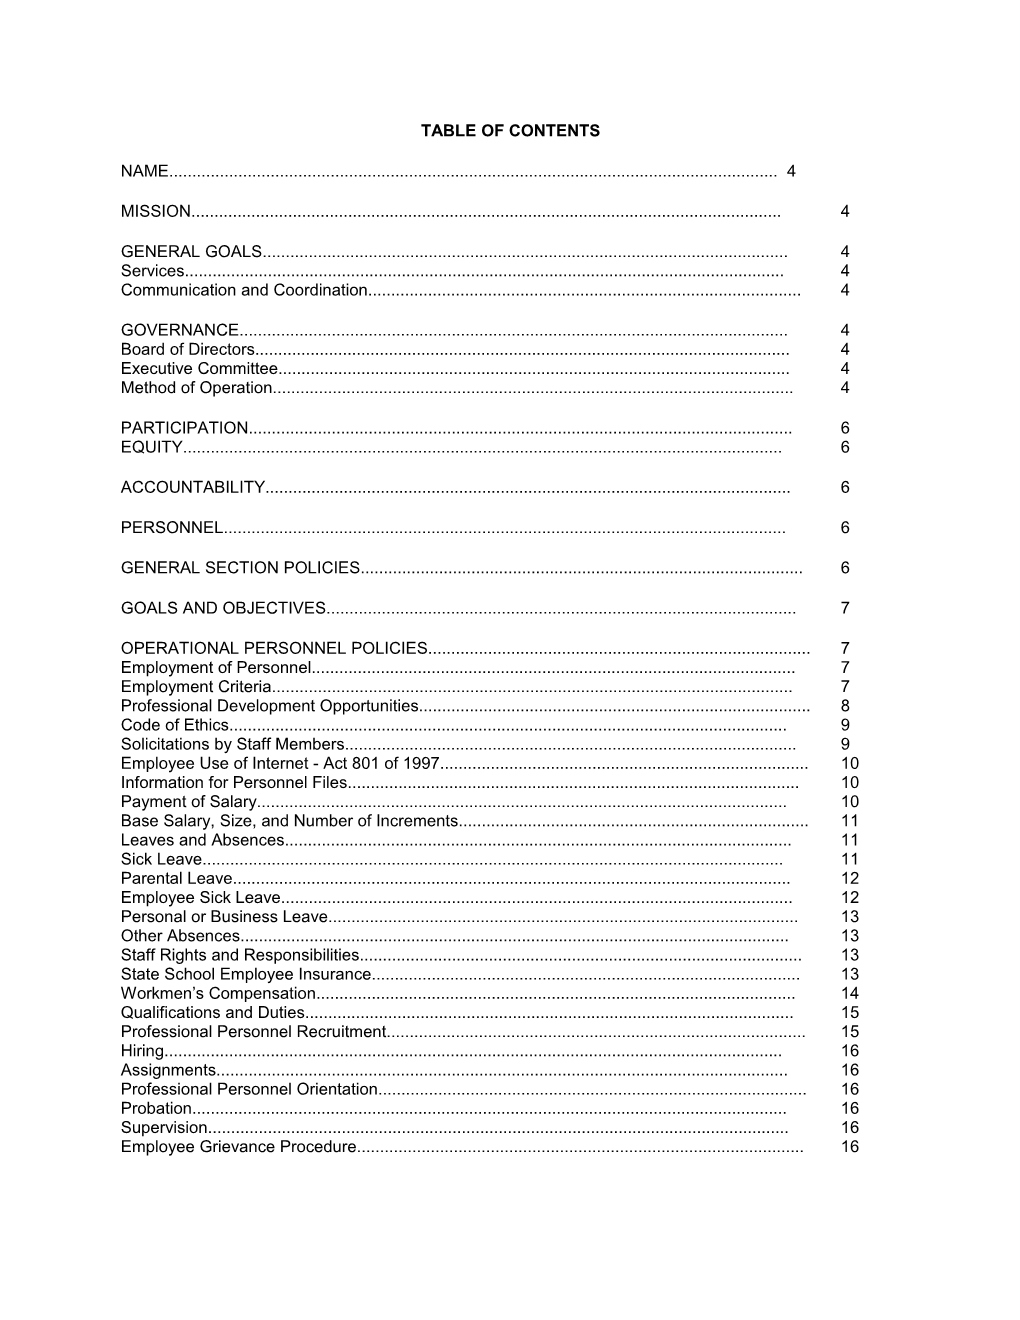 Table of Contents s361